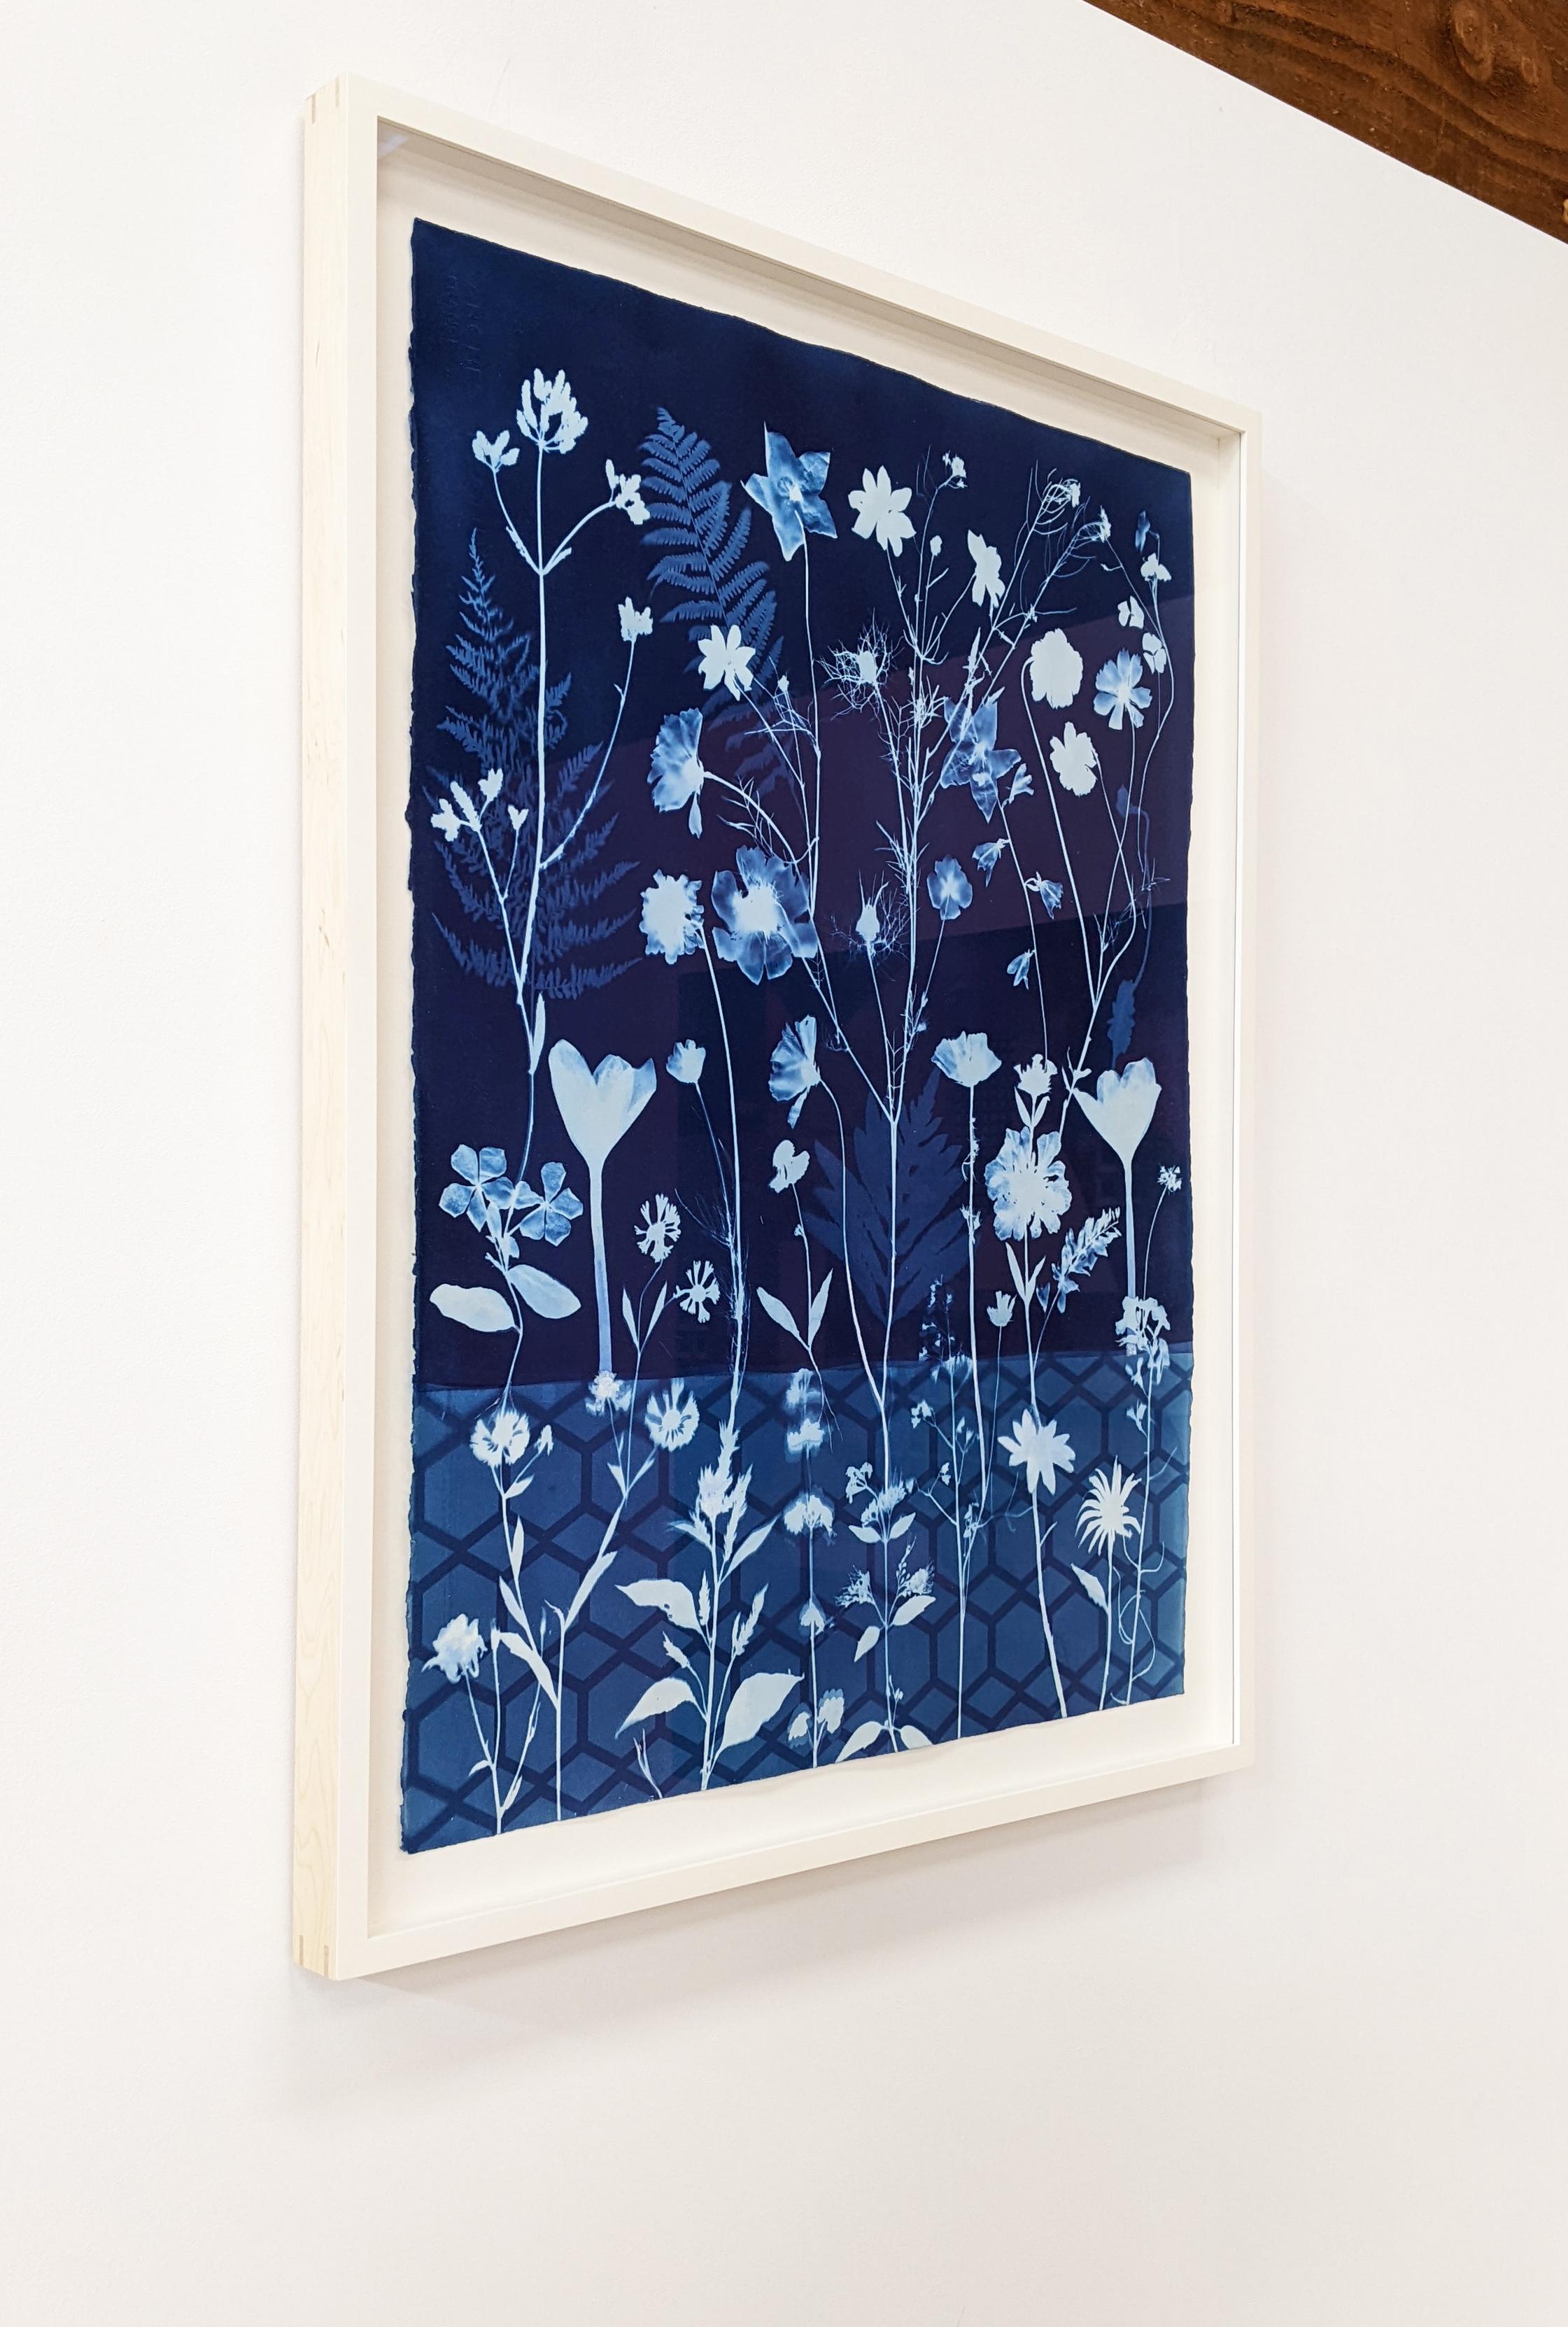 In this vertical work in watercolor, ink, gouache, and cyanotype on Arches platine paper, meticulously detailed flowers, including crocus, star flower, cosmos and ferns are depicted in shades of pale blue against a deep, indigo blue background with